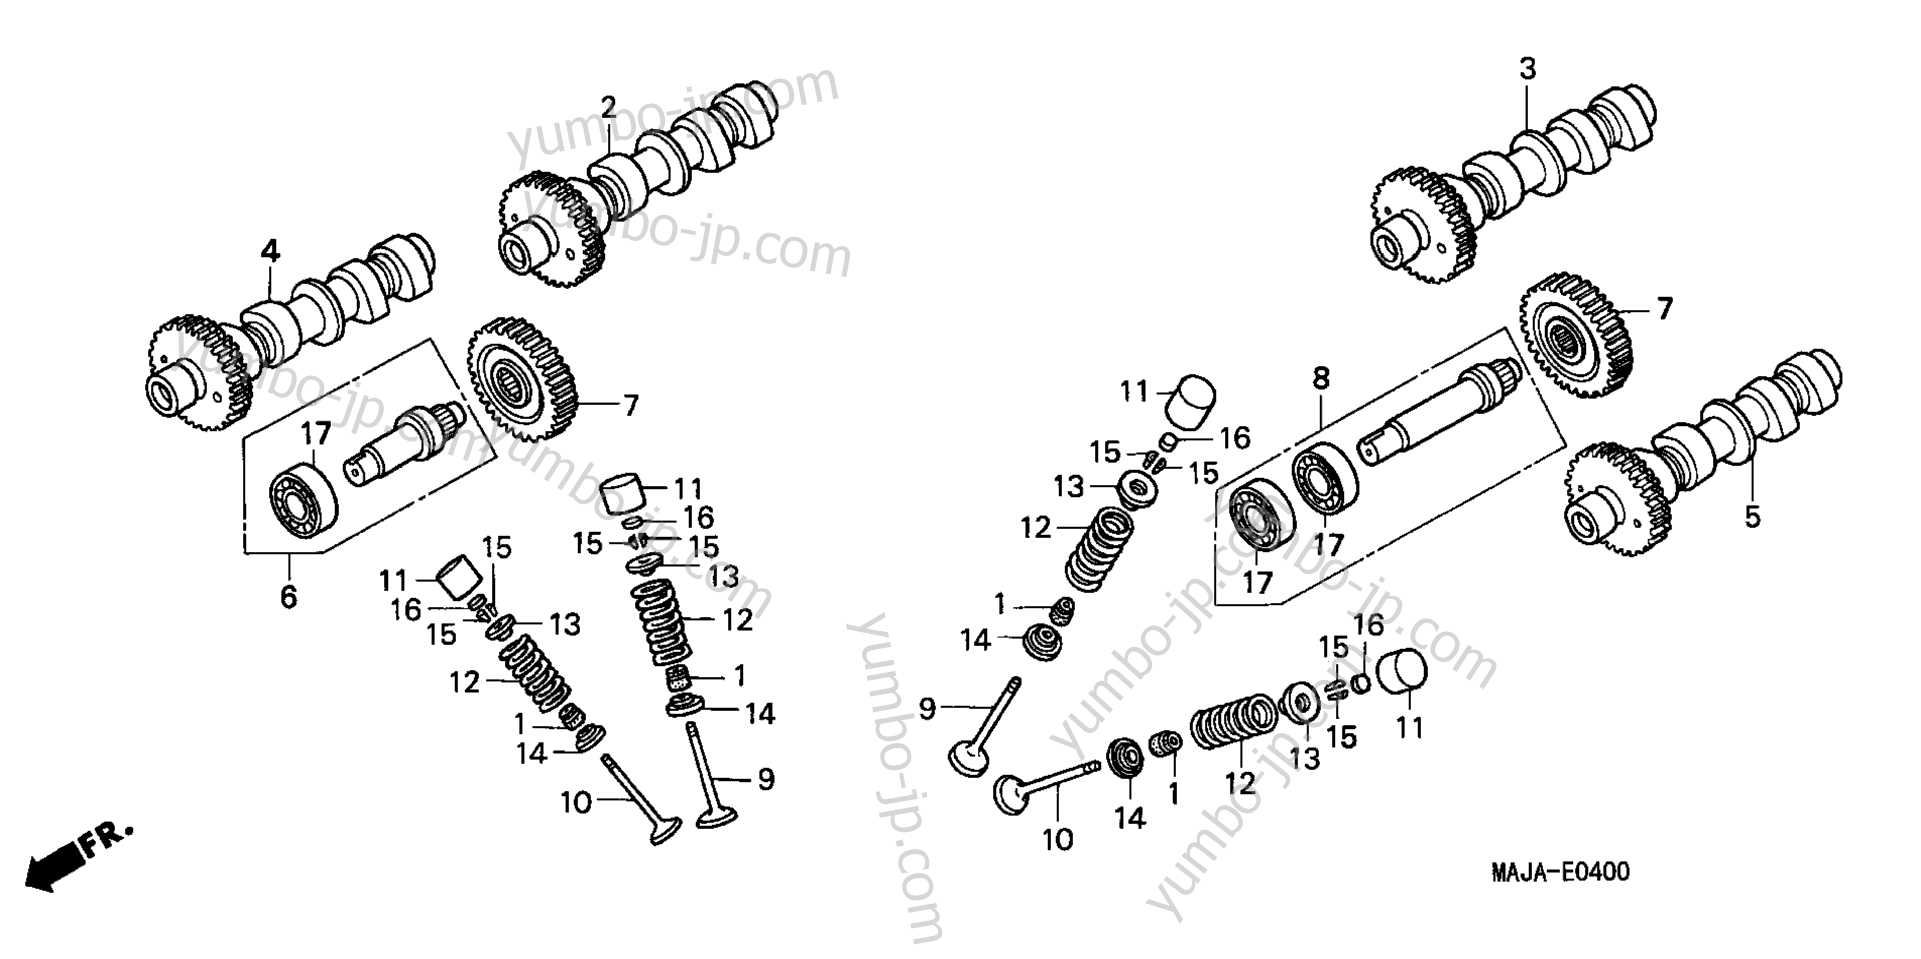 CAMSHAFT / VALVE for motorcycles HONDA ST1100 A 2001 year